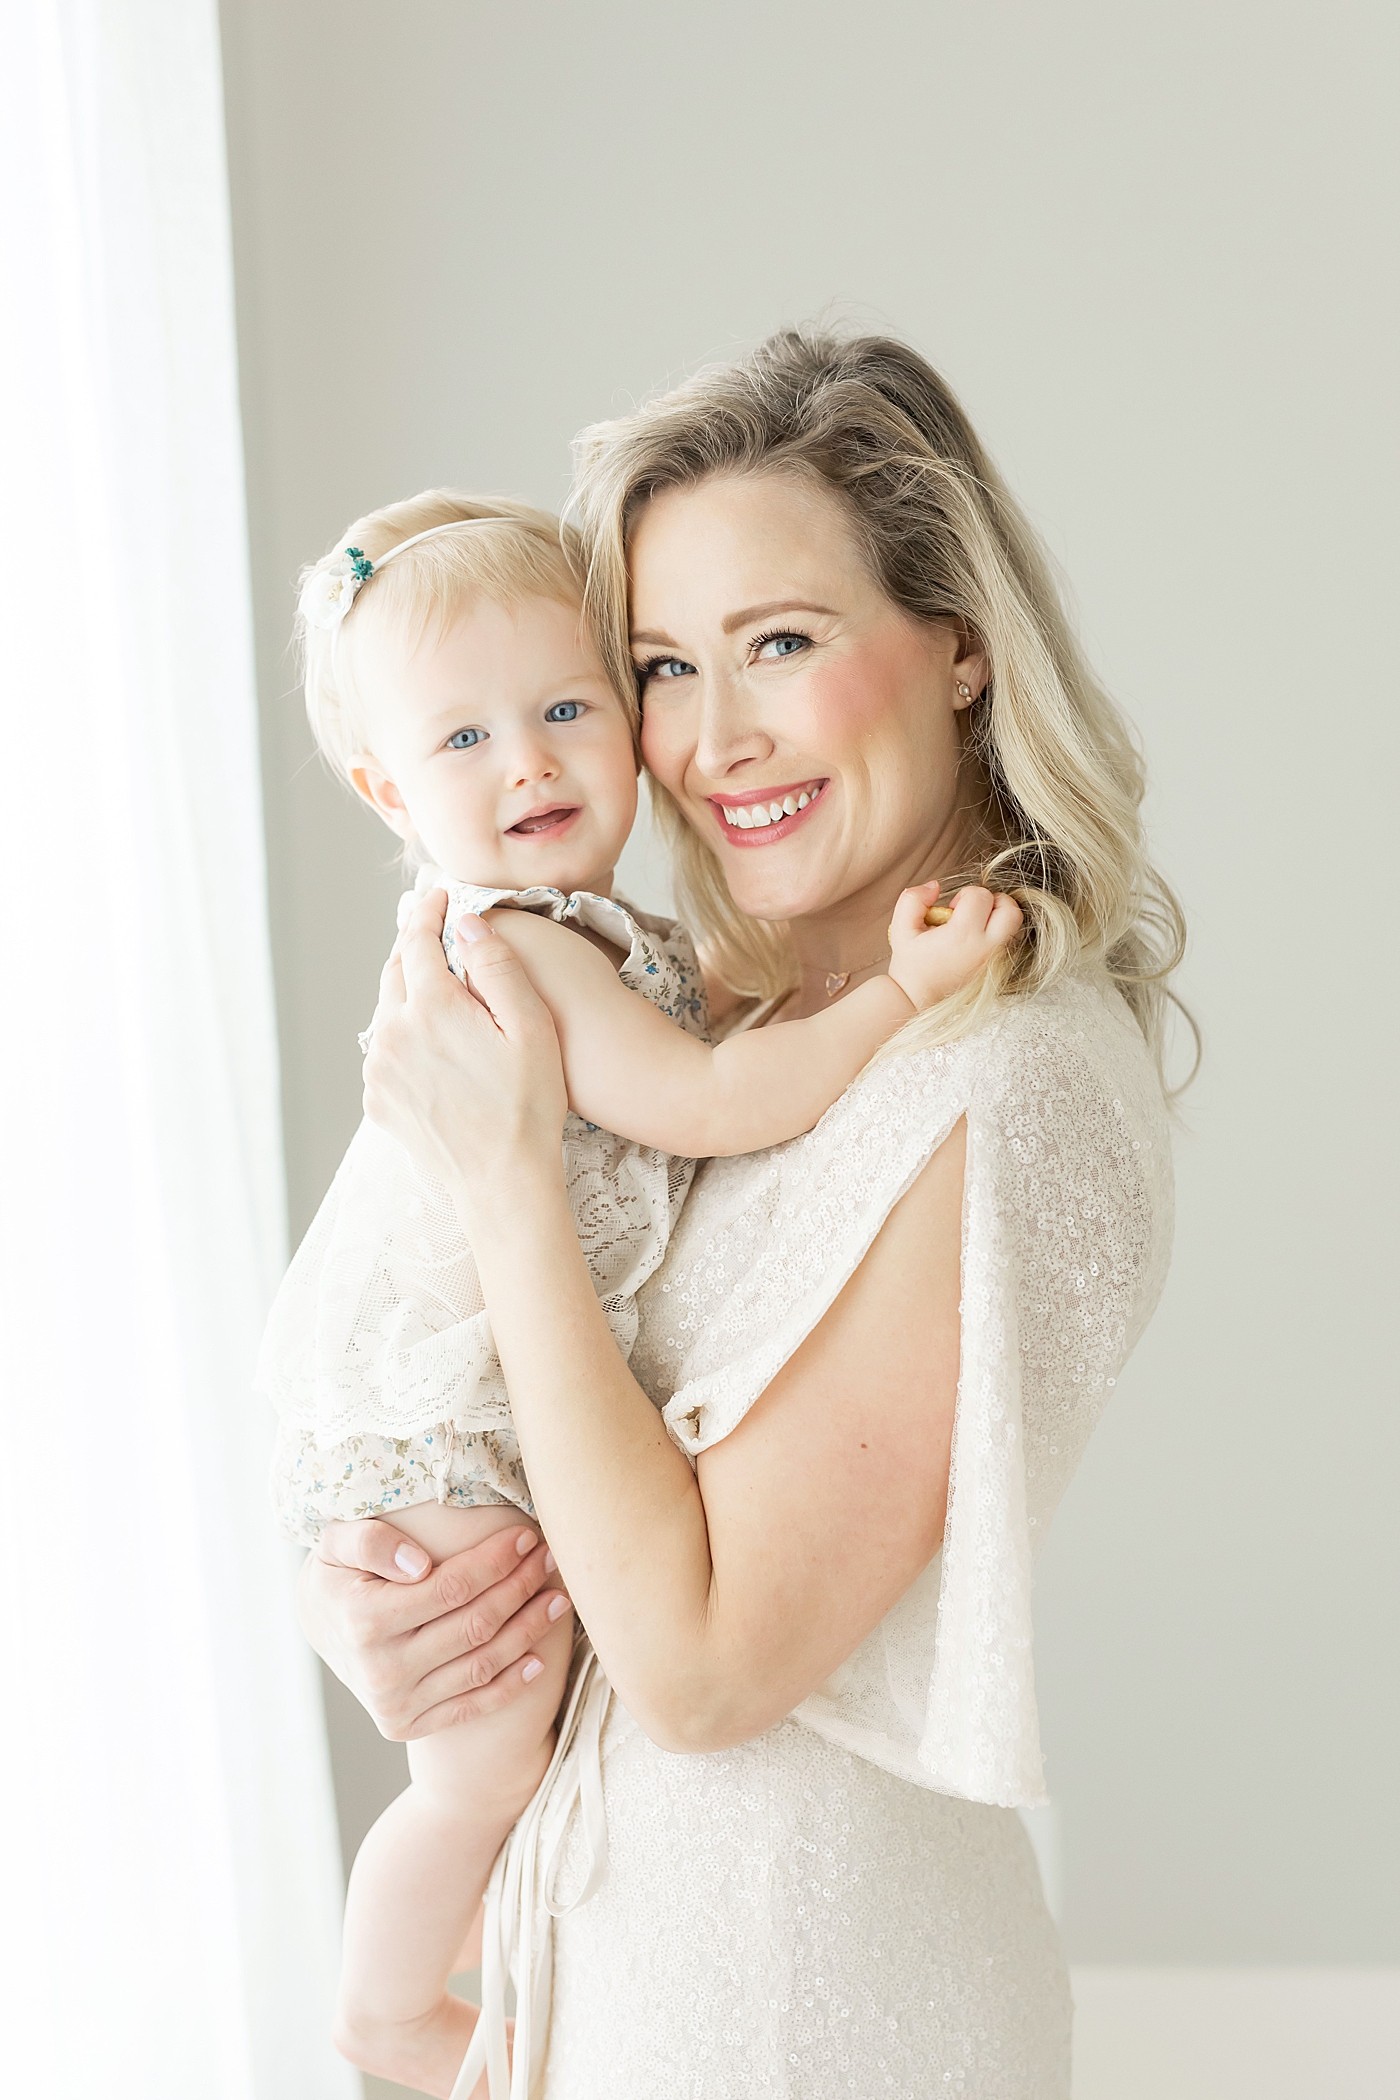 Mom and daughter smiling for photo together with Fresh Light Photography.